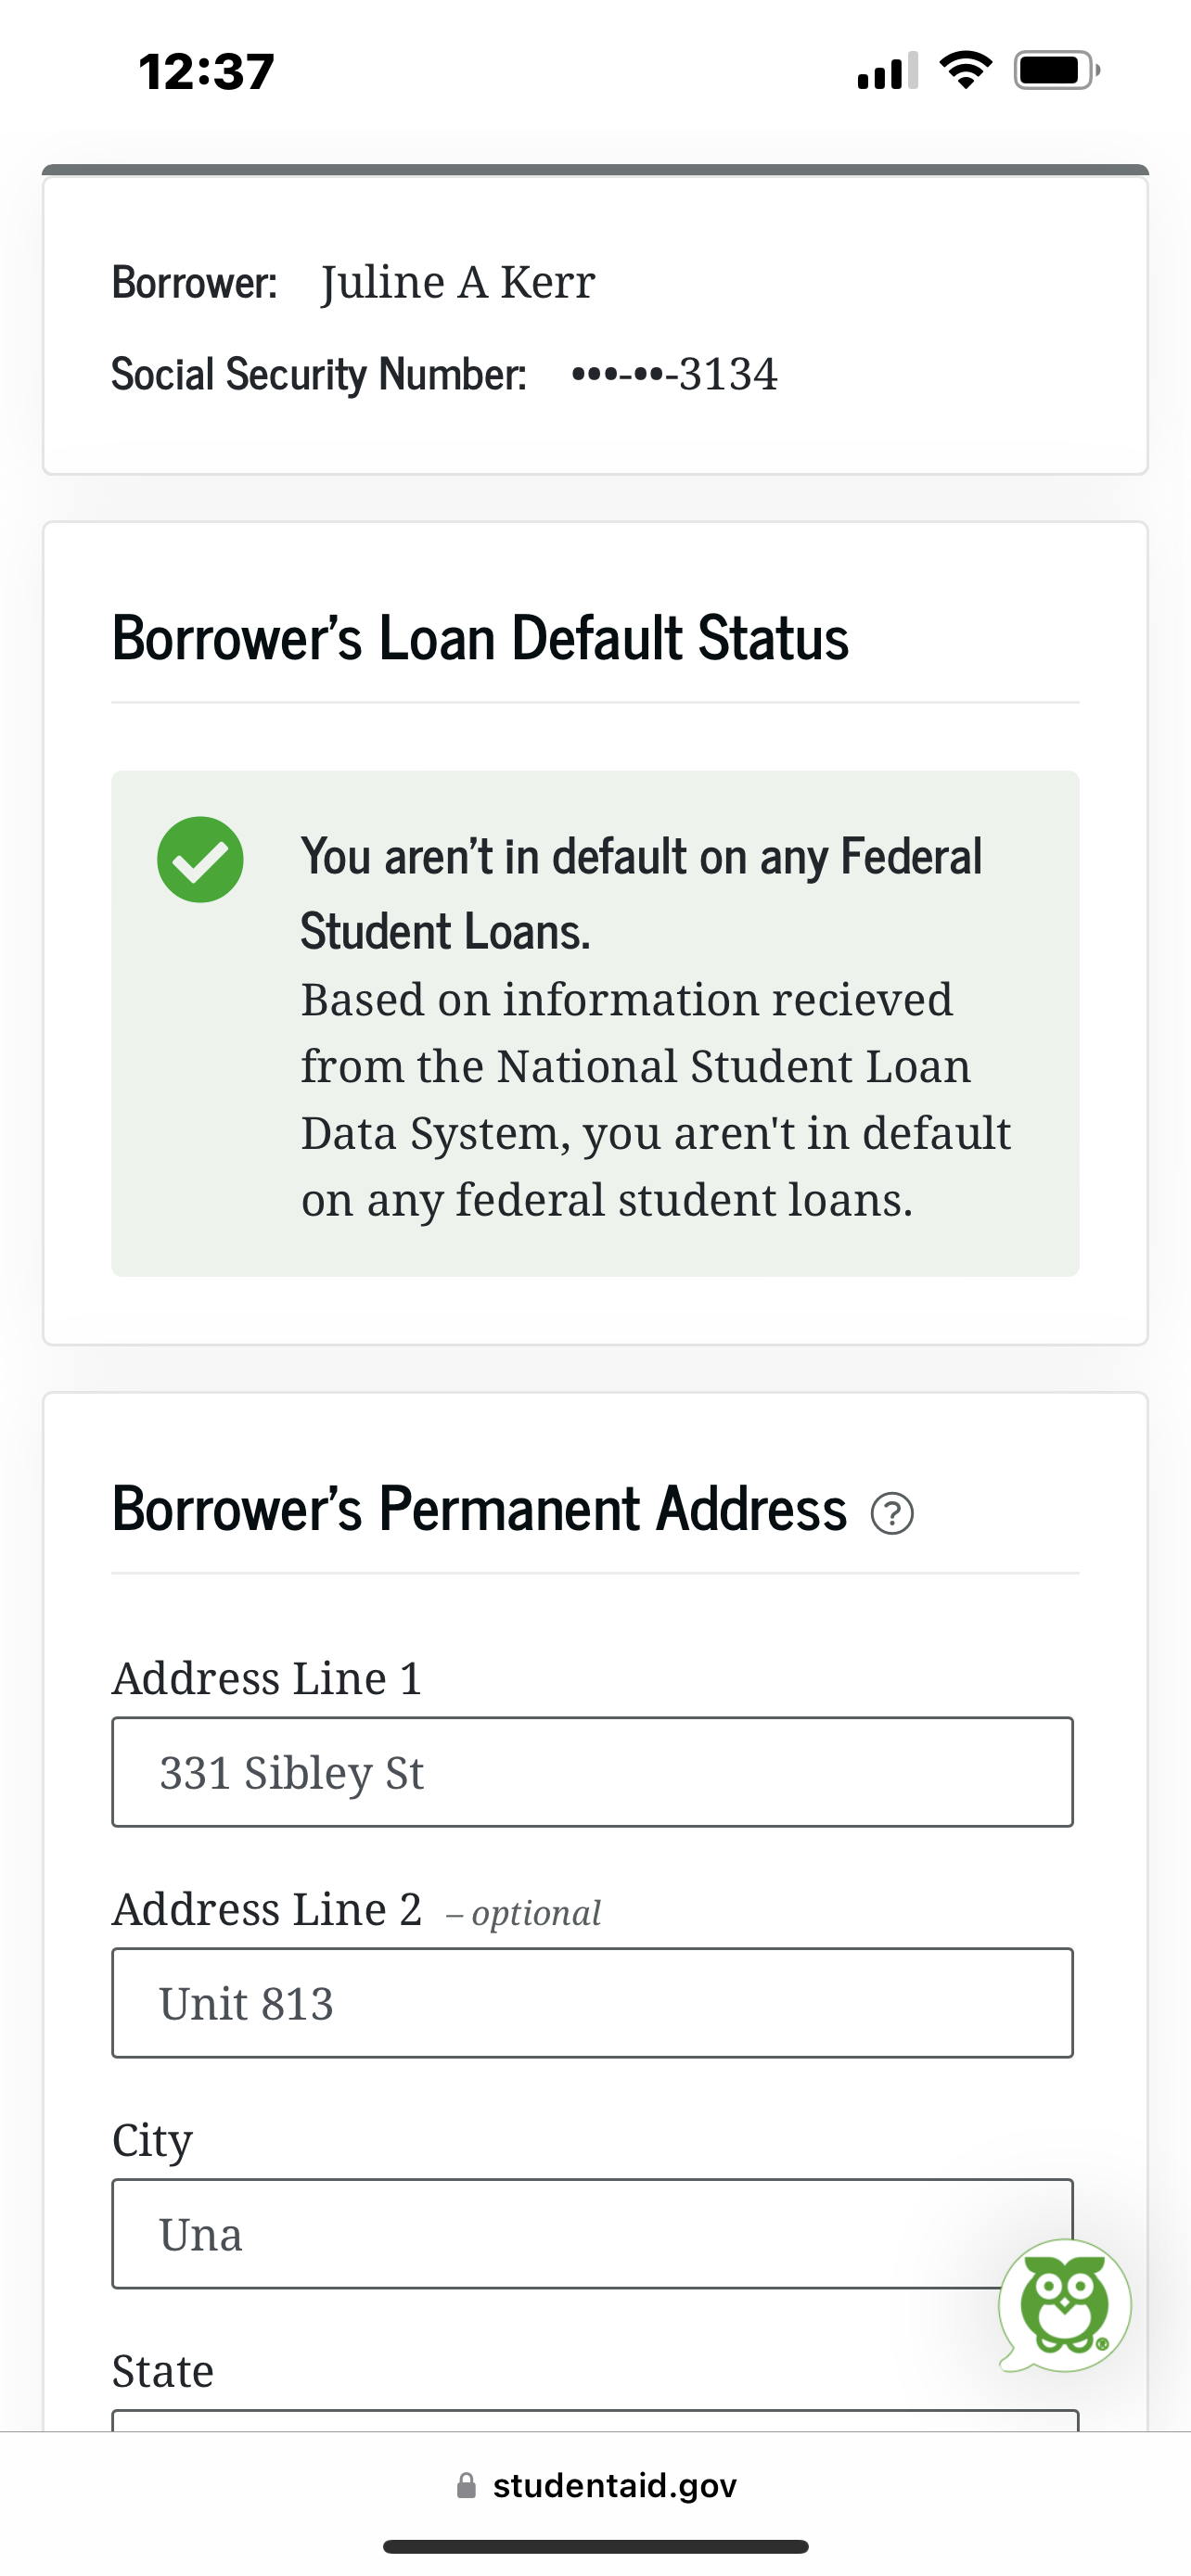 Never defaulted student loans since 2003